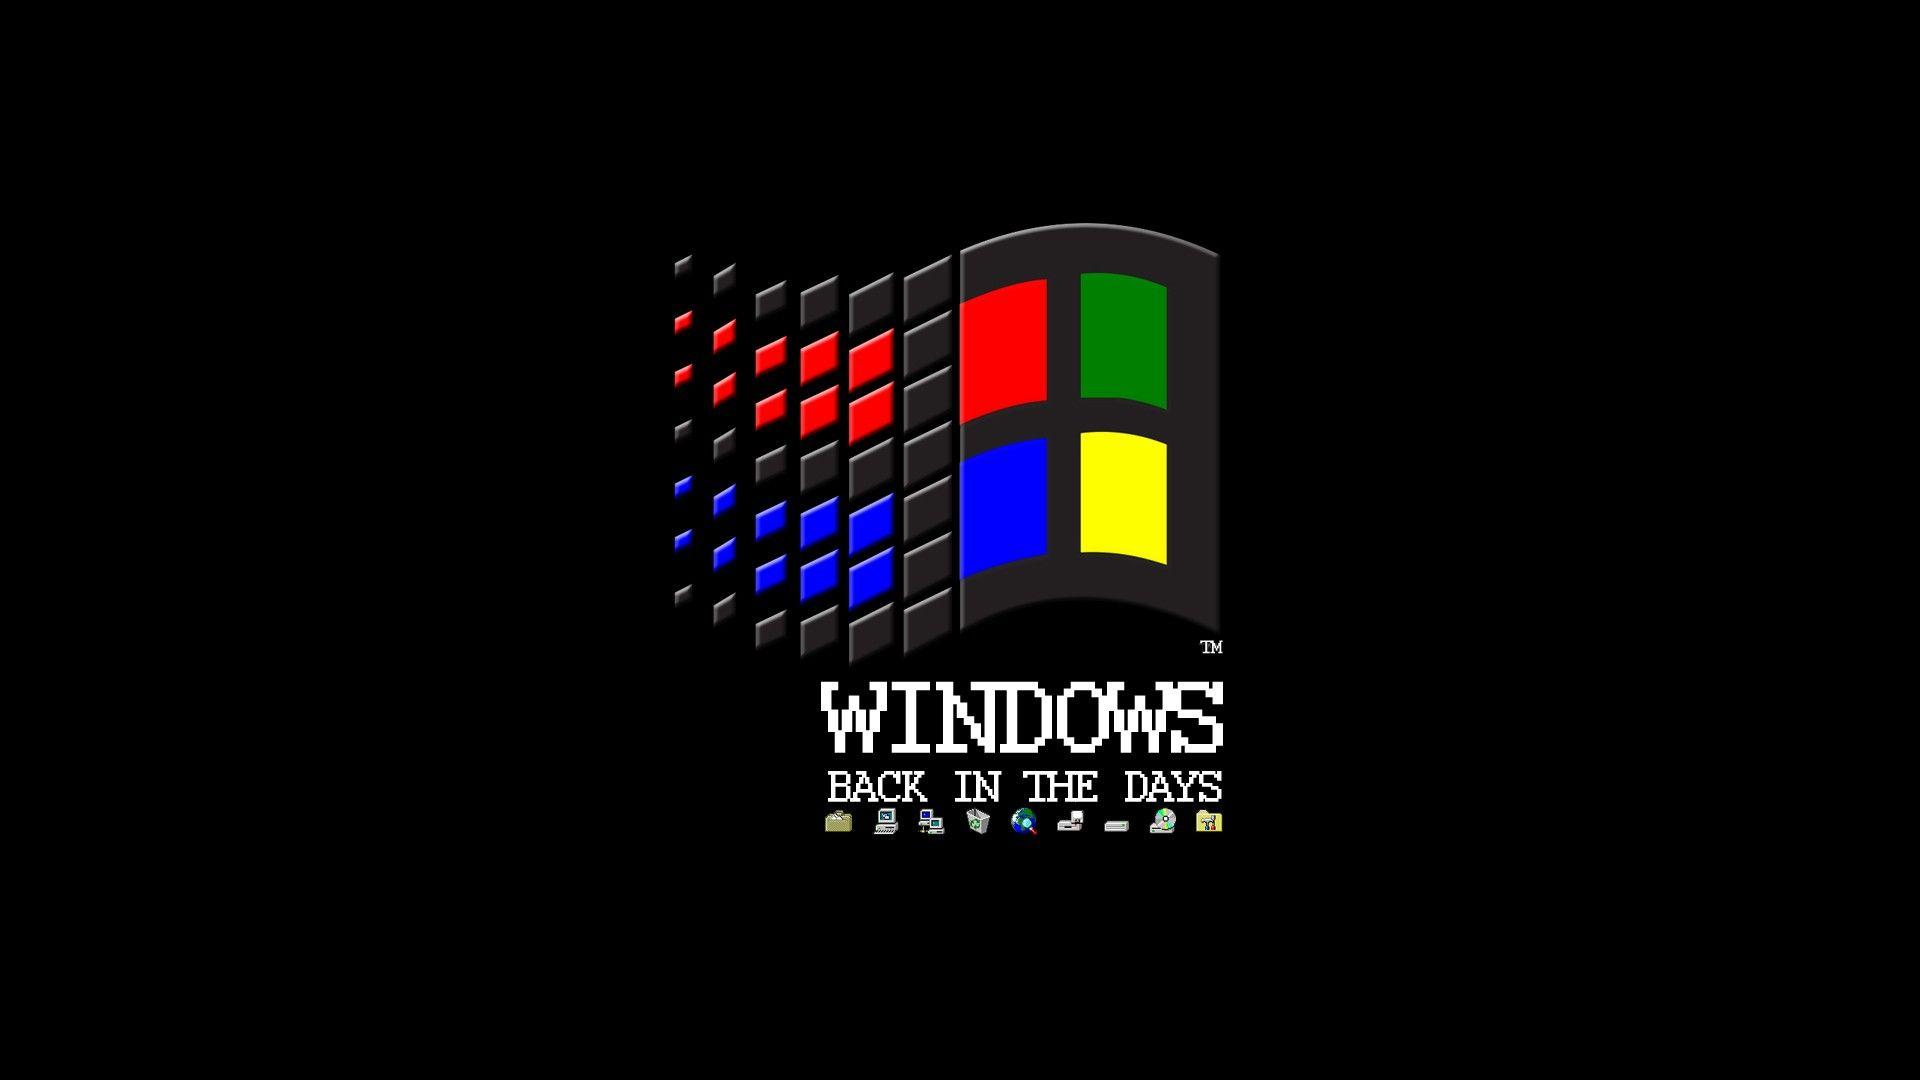 back, operating systems, The Days, Microsoft Windows, logos, old